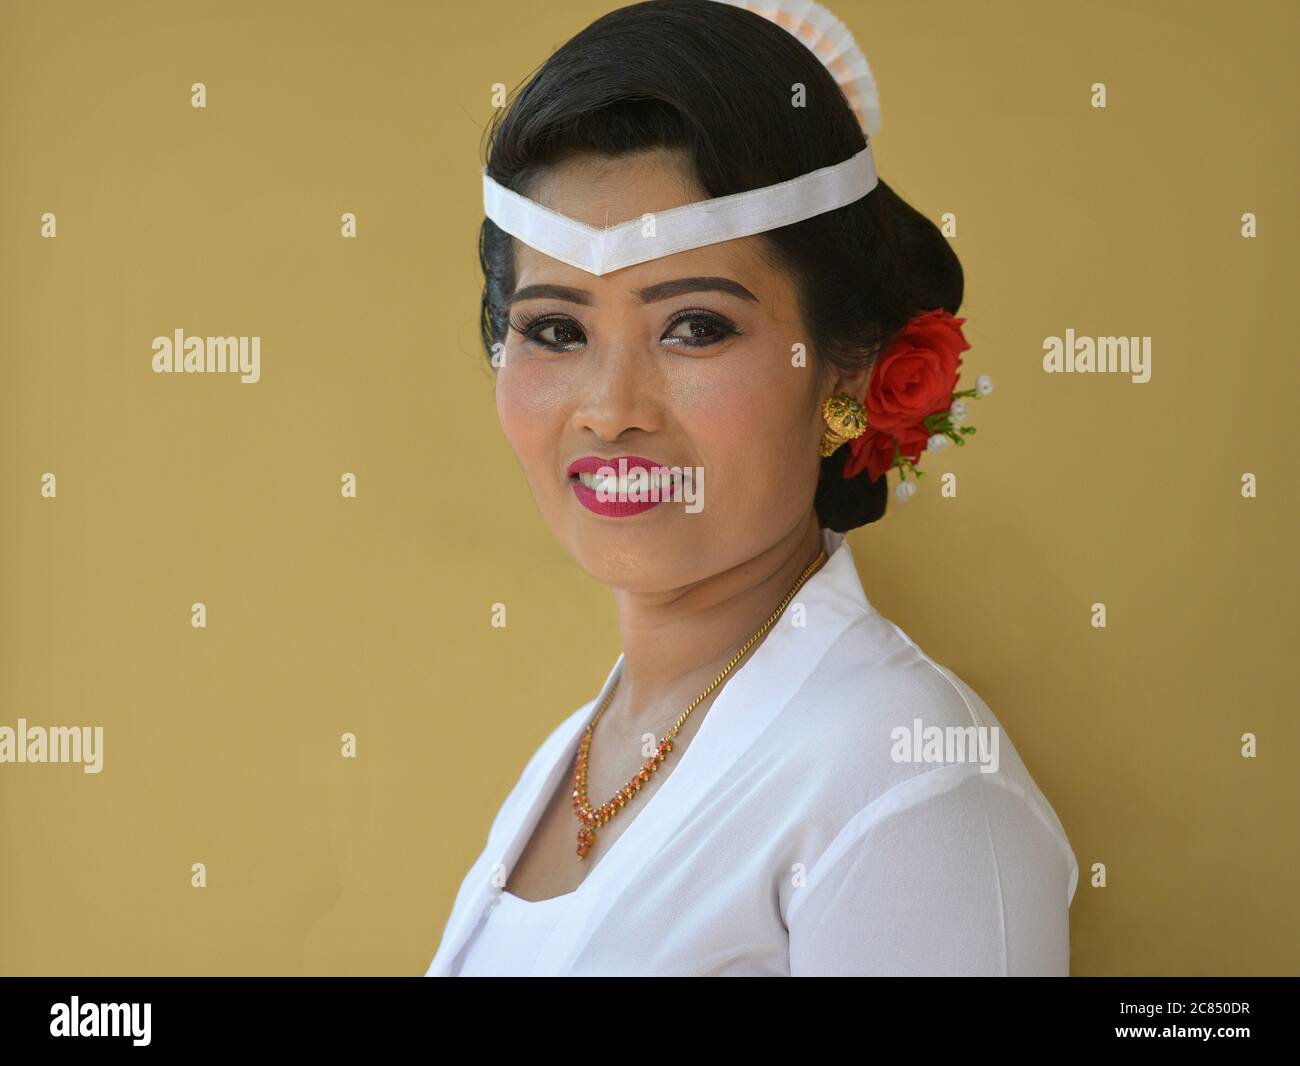 Indonesian Balinese woman wears white outfit and smiles for the camera during a religious Hindu temple ceremony (Odalan festival). Stock Photo